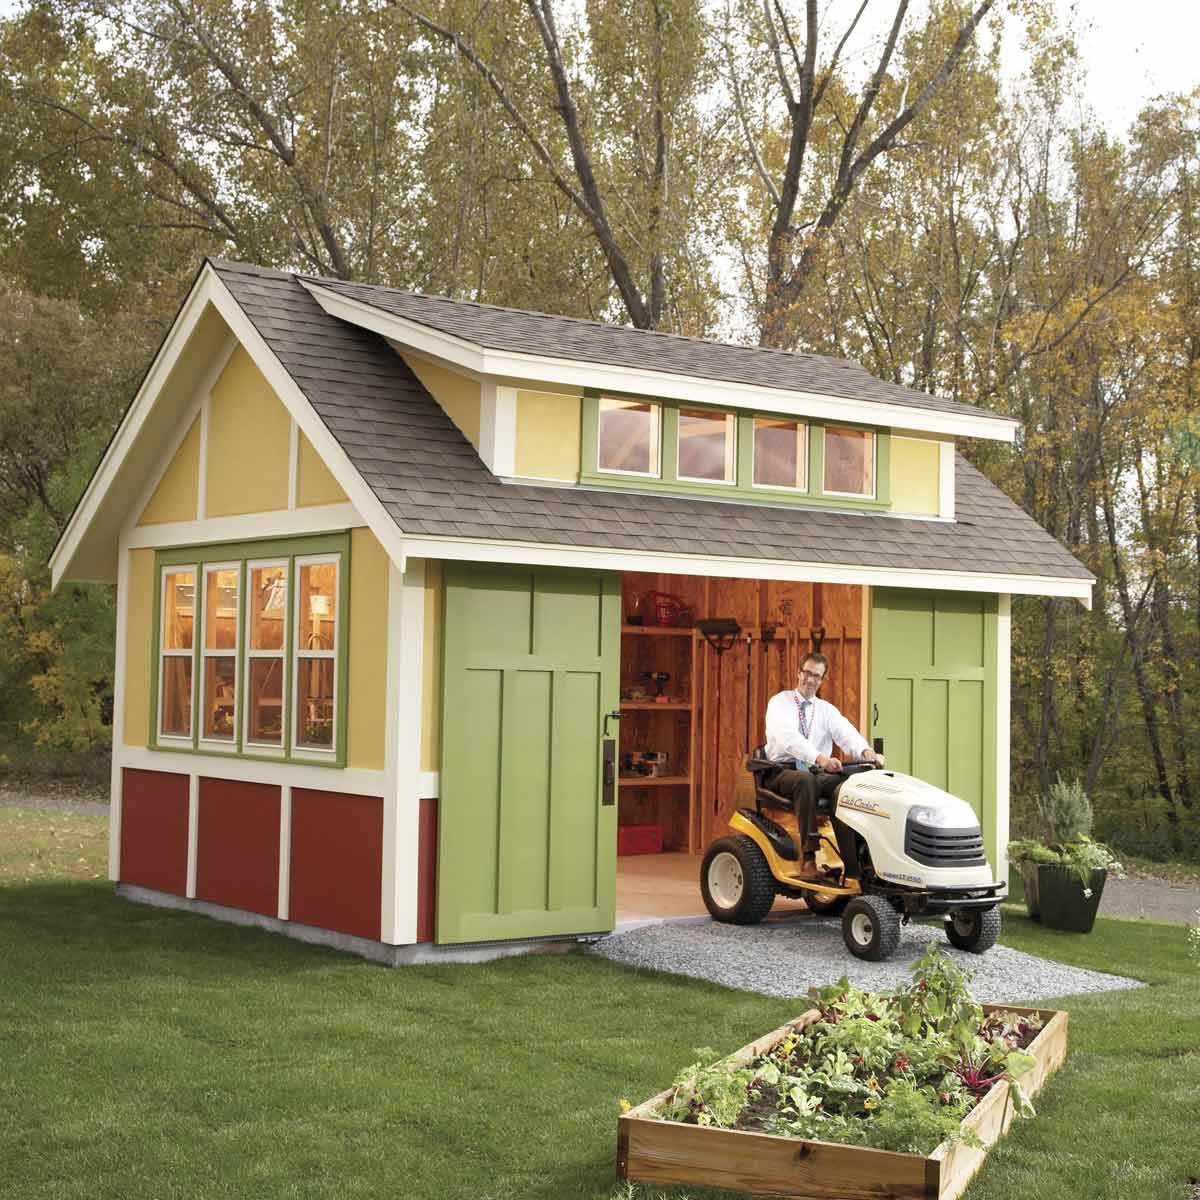 How to Build a Shed: 2011 Garden Shed | Family Handyman